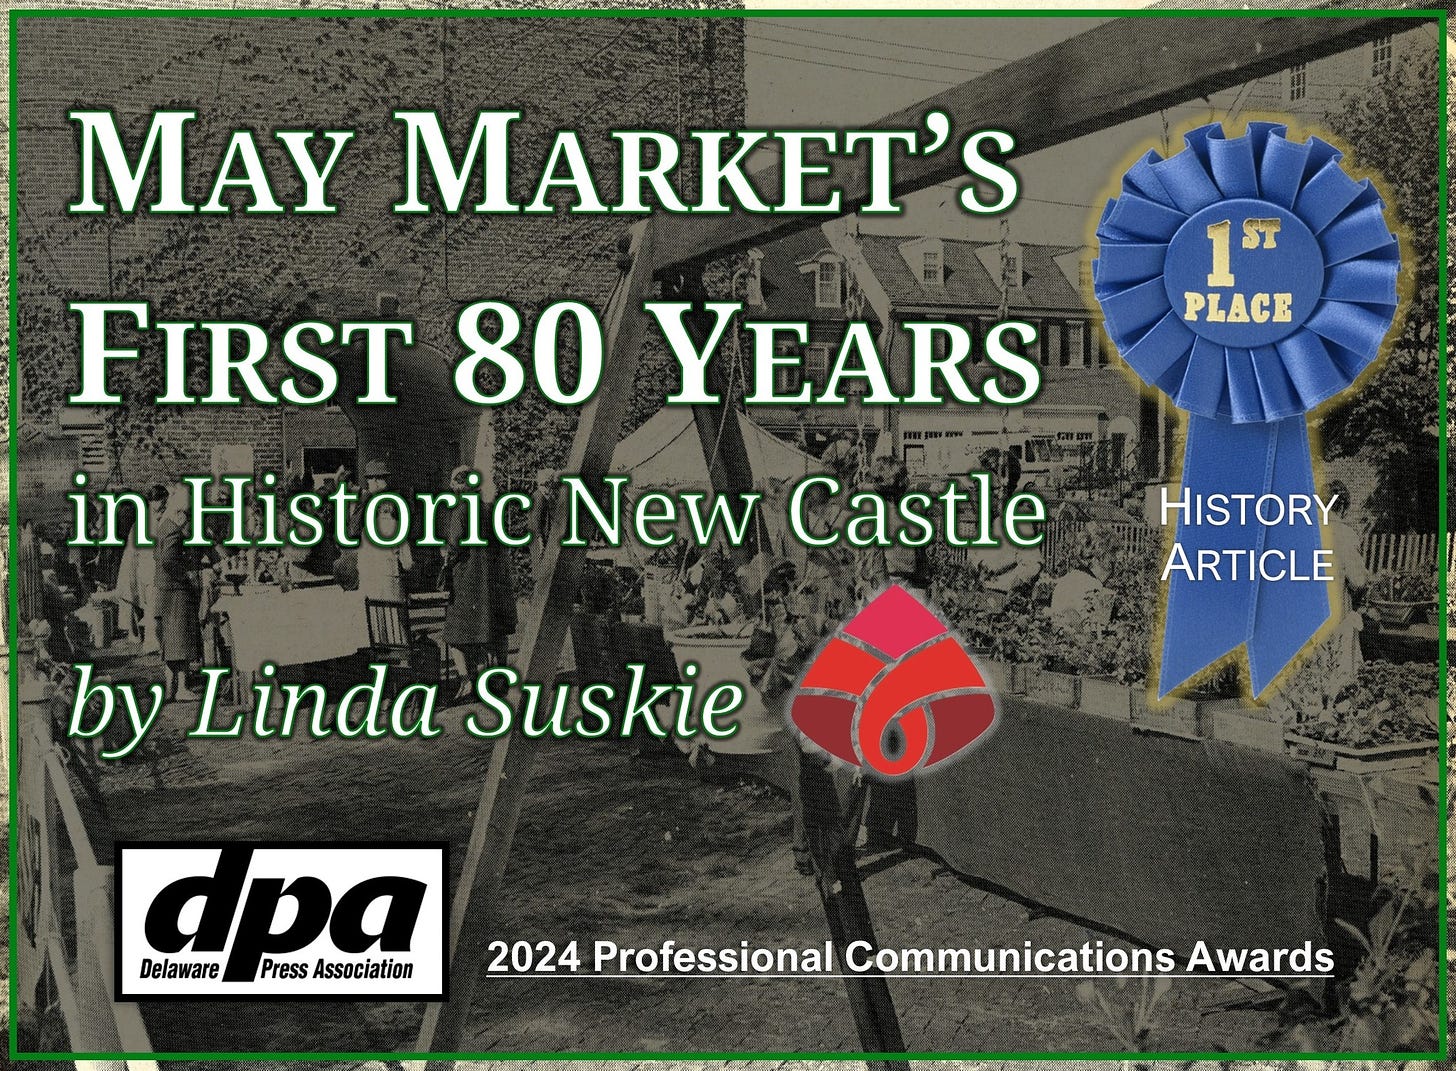 May be an image of text that says 'MAY MARKET'S 1ST PLACE FIRST 80 YEARS in Historic New Castle HISTORY ARTICLE by Linda Suskie dpa Press Association Delaware 2024 Professional Communications Awards'